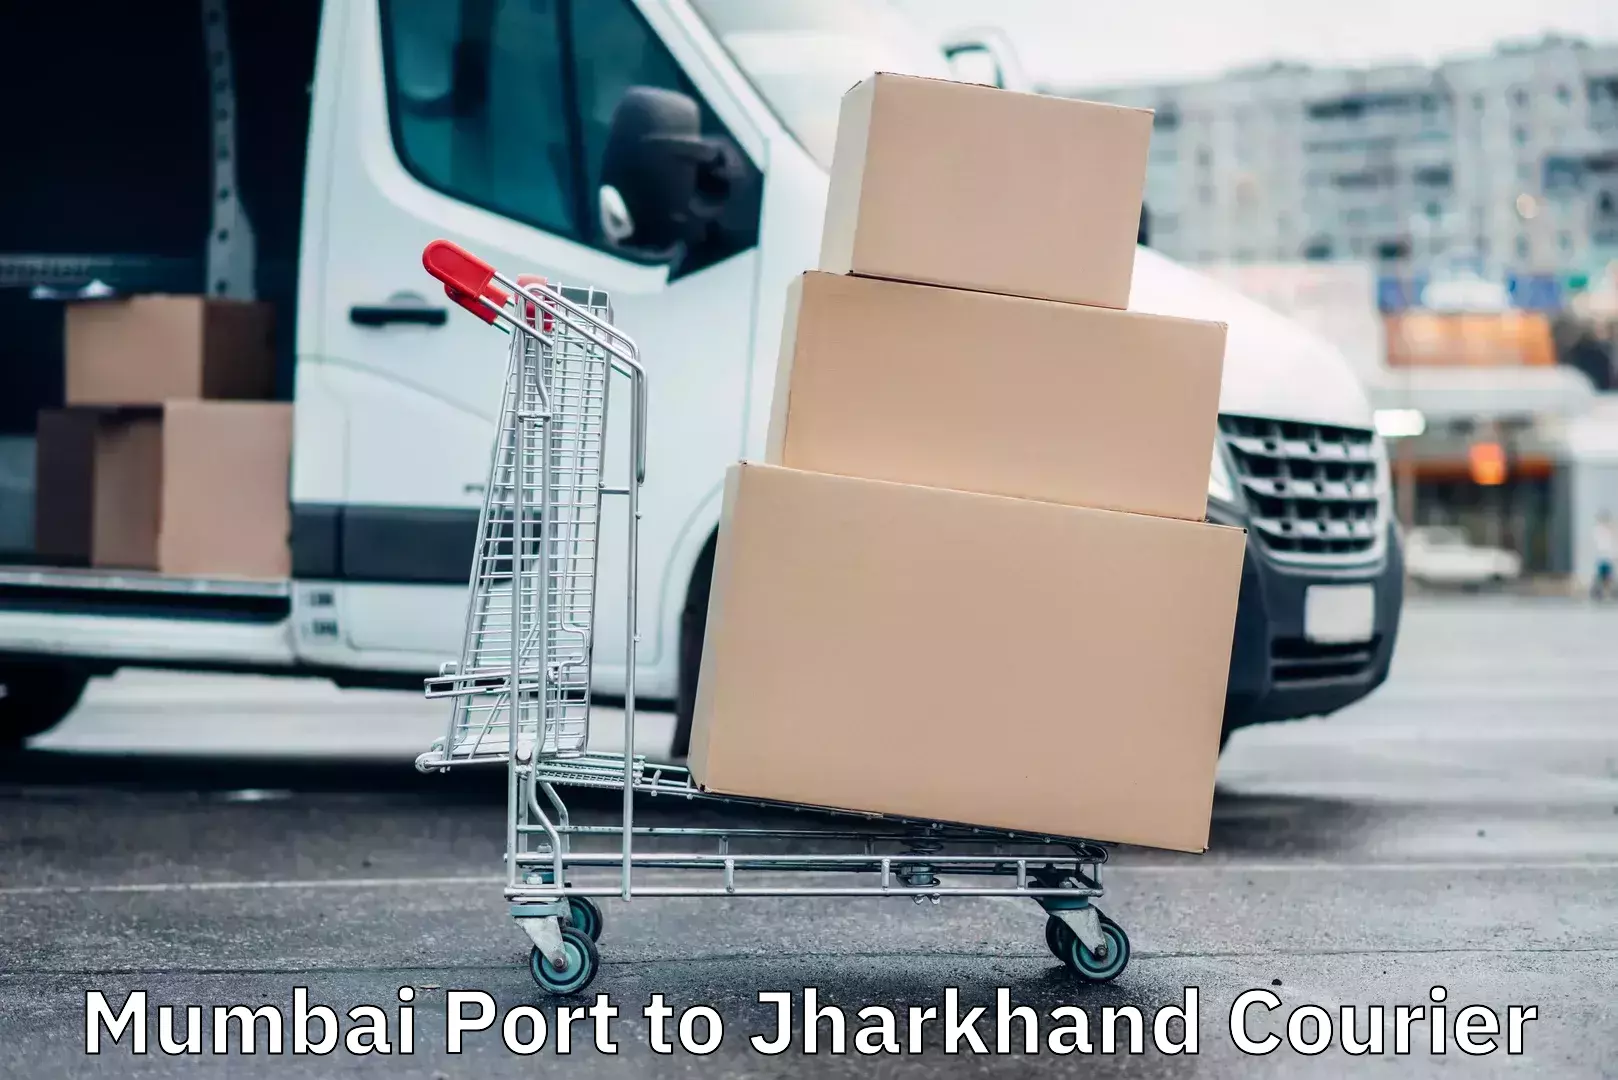 Global courier networks Mumbai Port to Jharkhand